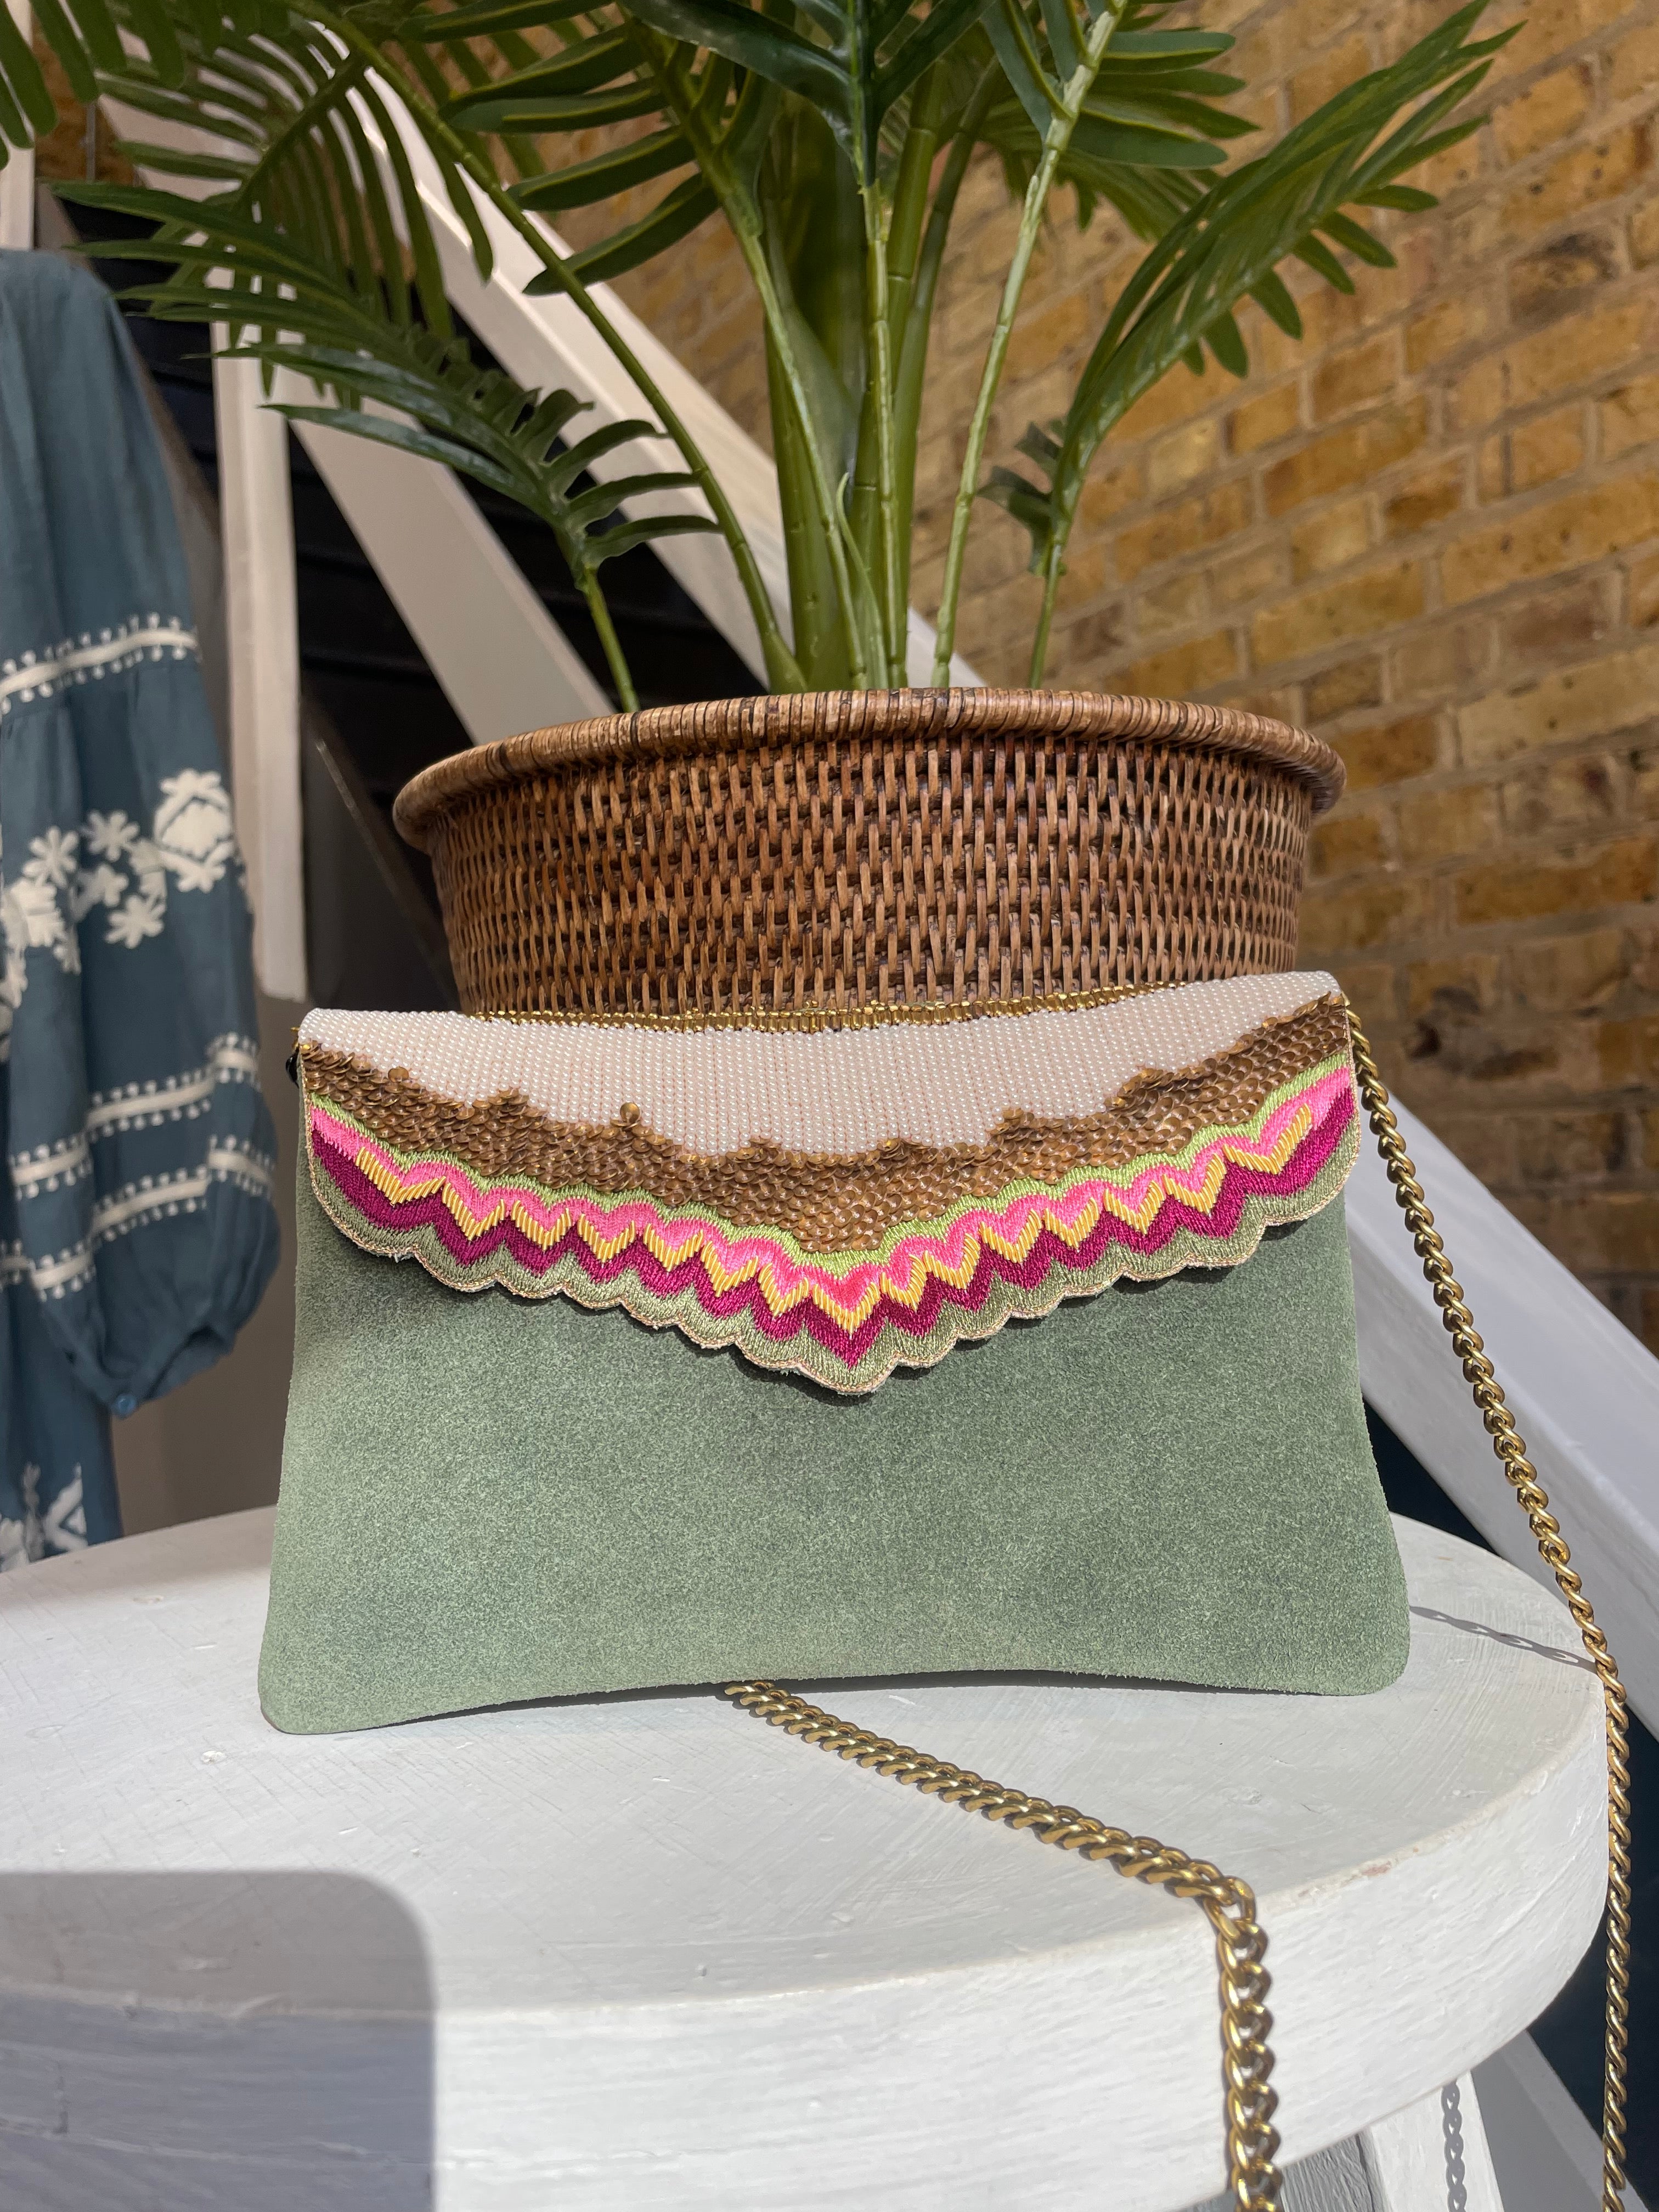 embroidered clutch or cross body bag green and pink